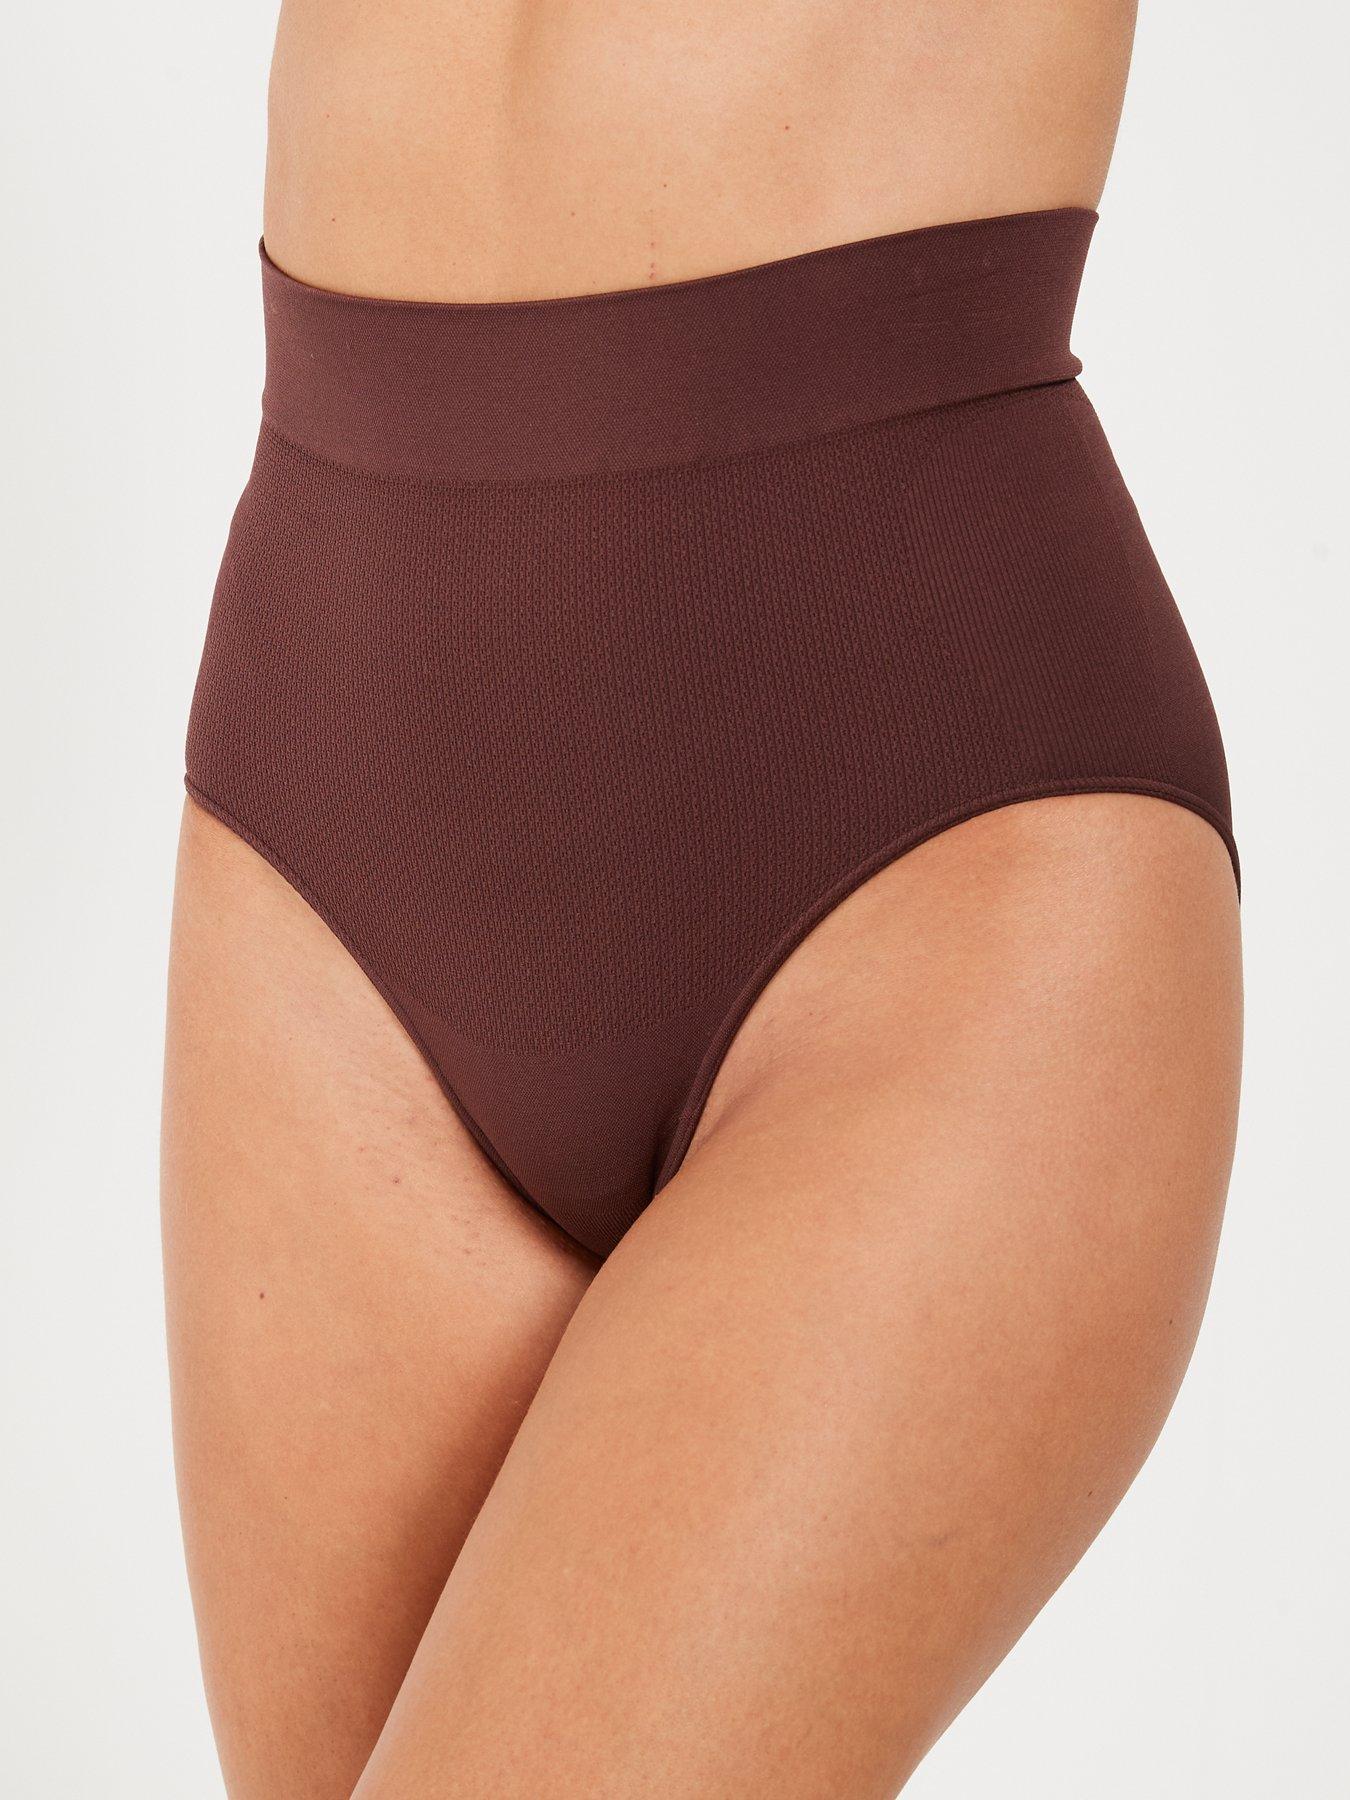 Spanx, Everyday Seamless Shaping High-Waisted Short